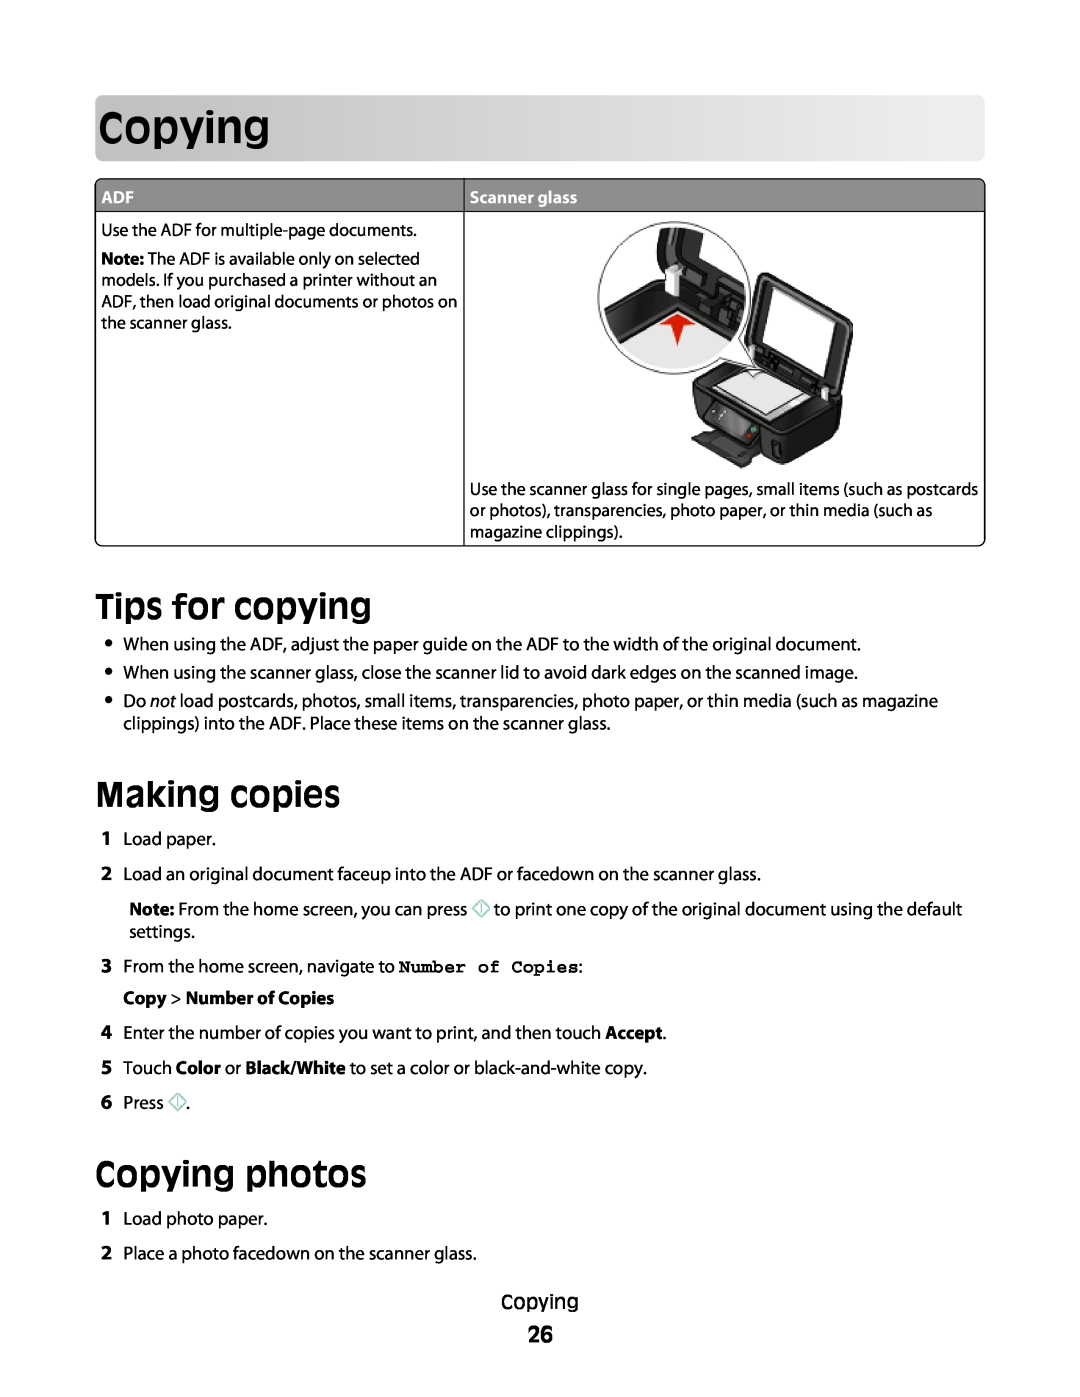 Lexmark S600 manual Tips for copying, Making copies, Copying photos 